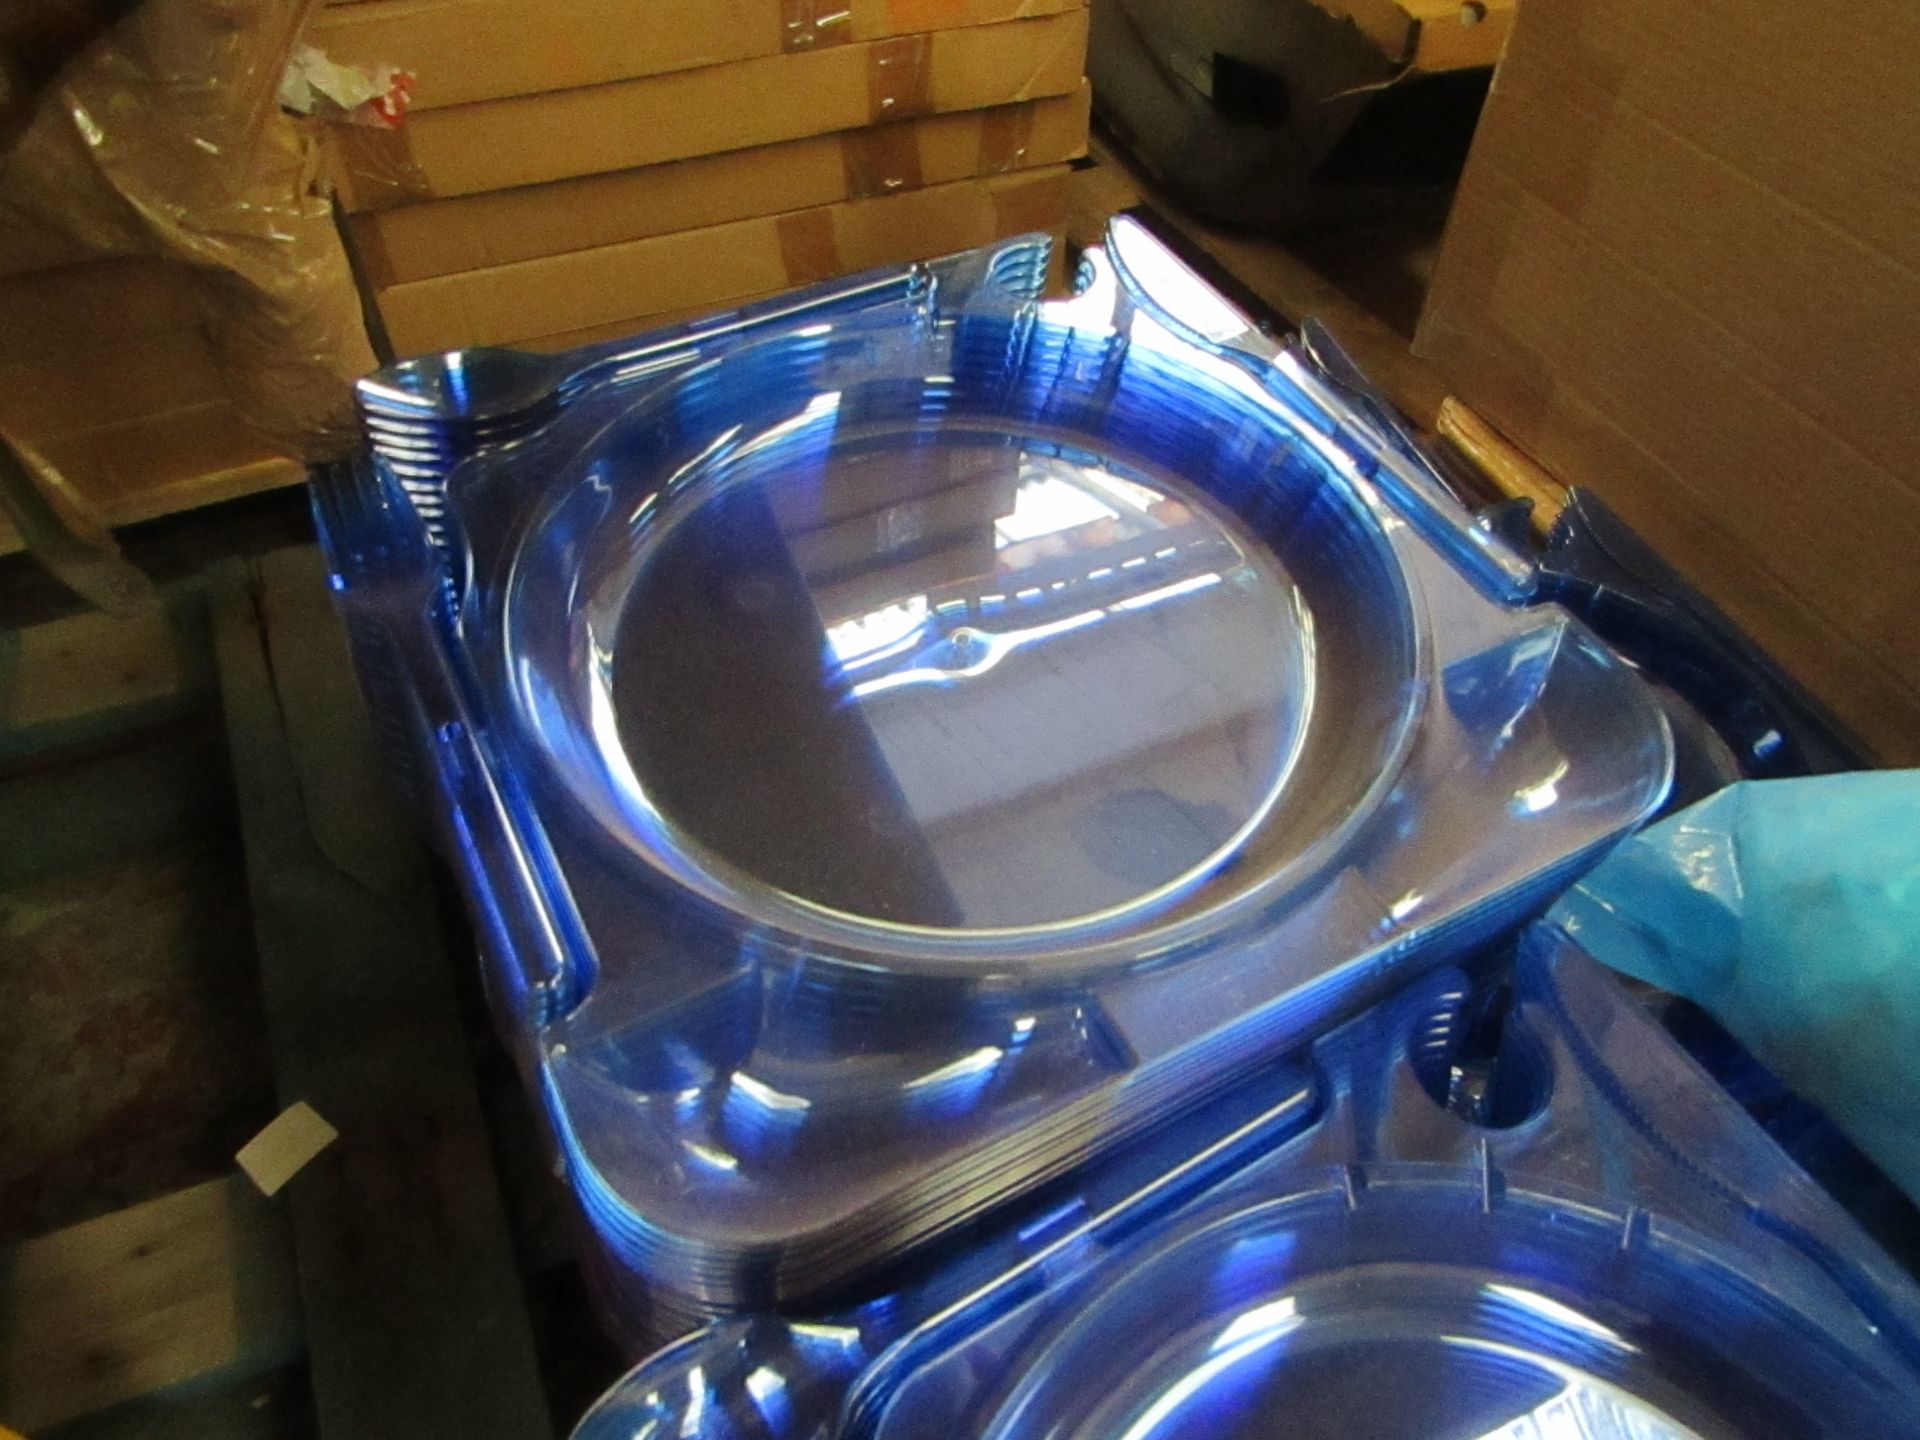 20x Blue Plastic Disposable Plates (Includes Plastic Cutlery) - Good Condition.